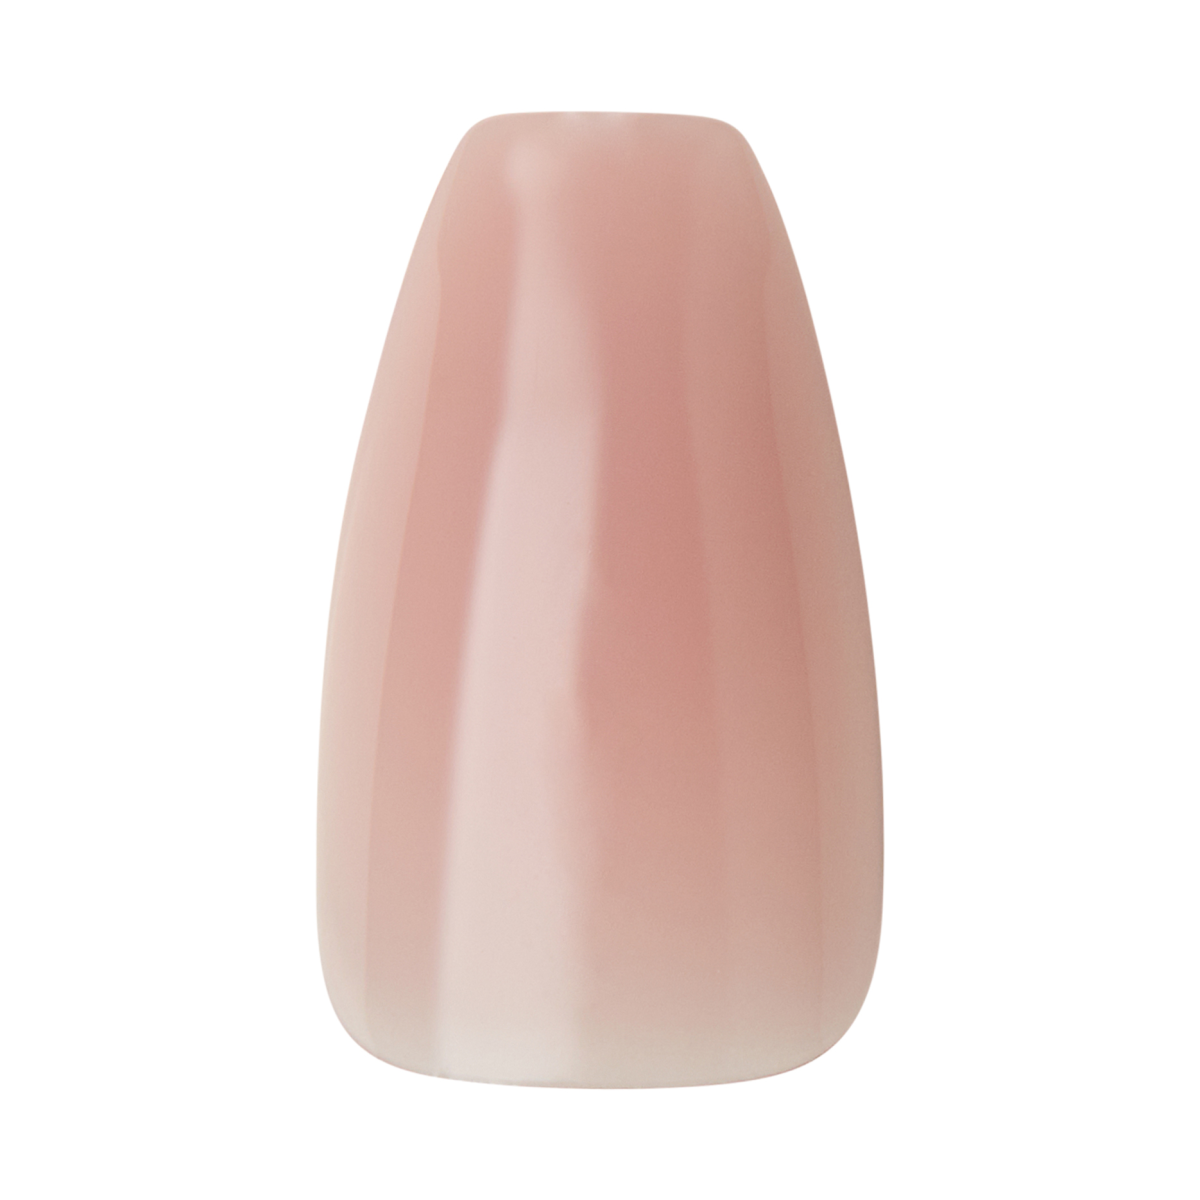 KISS Bare But Better, Press-On Nails, Bisque, Nude, Med Coffin, 28ct